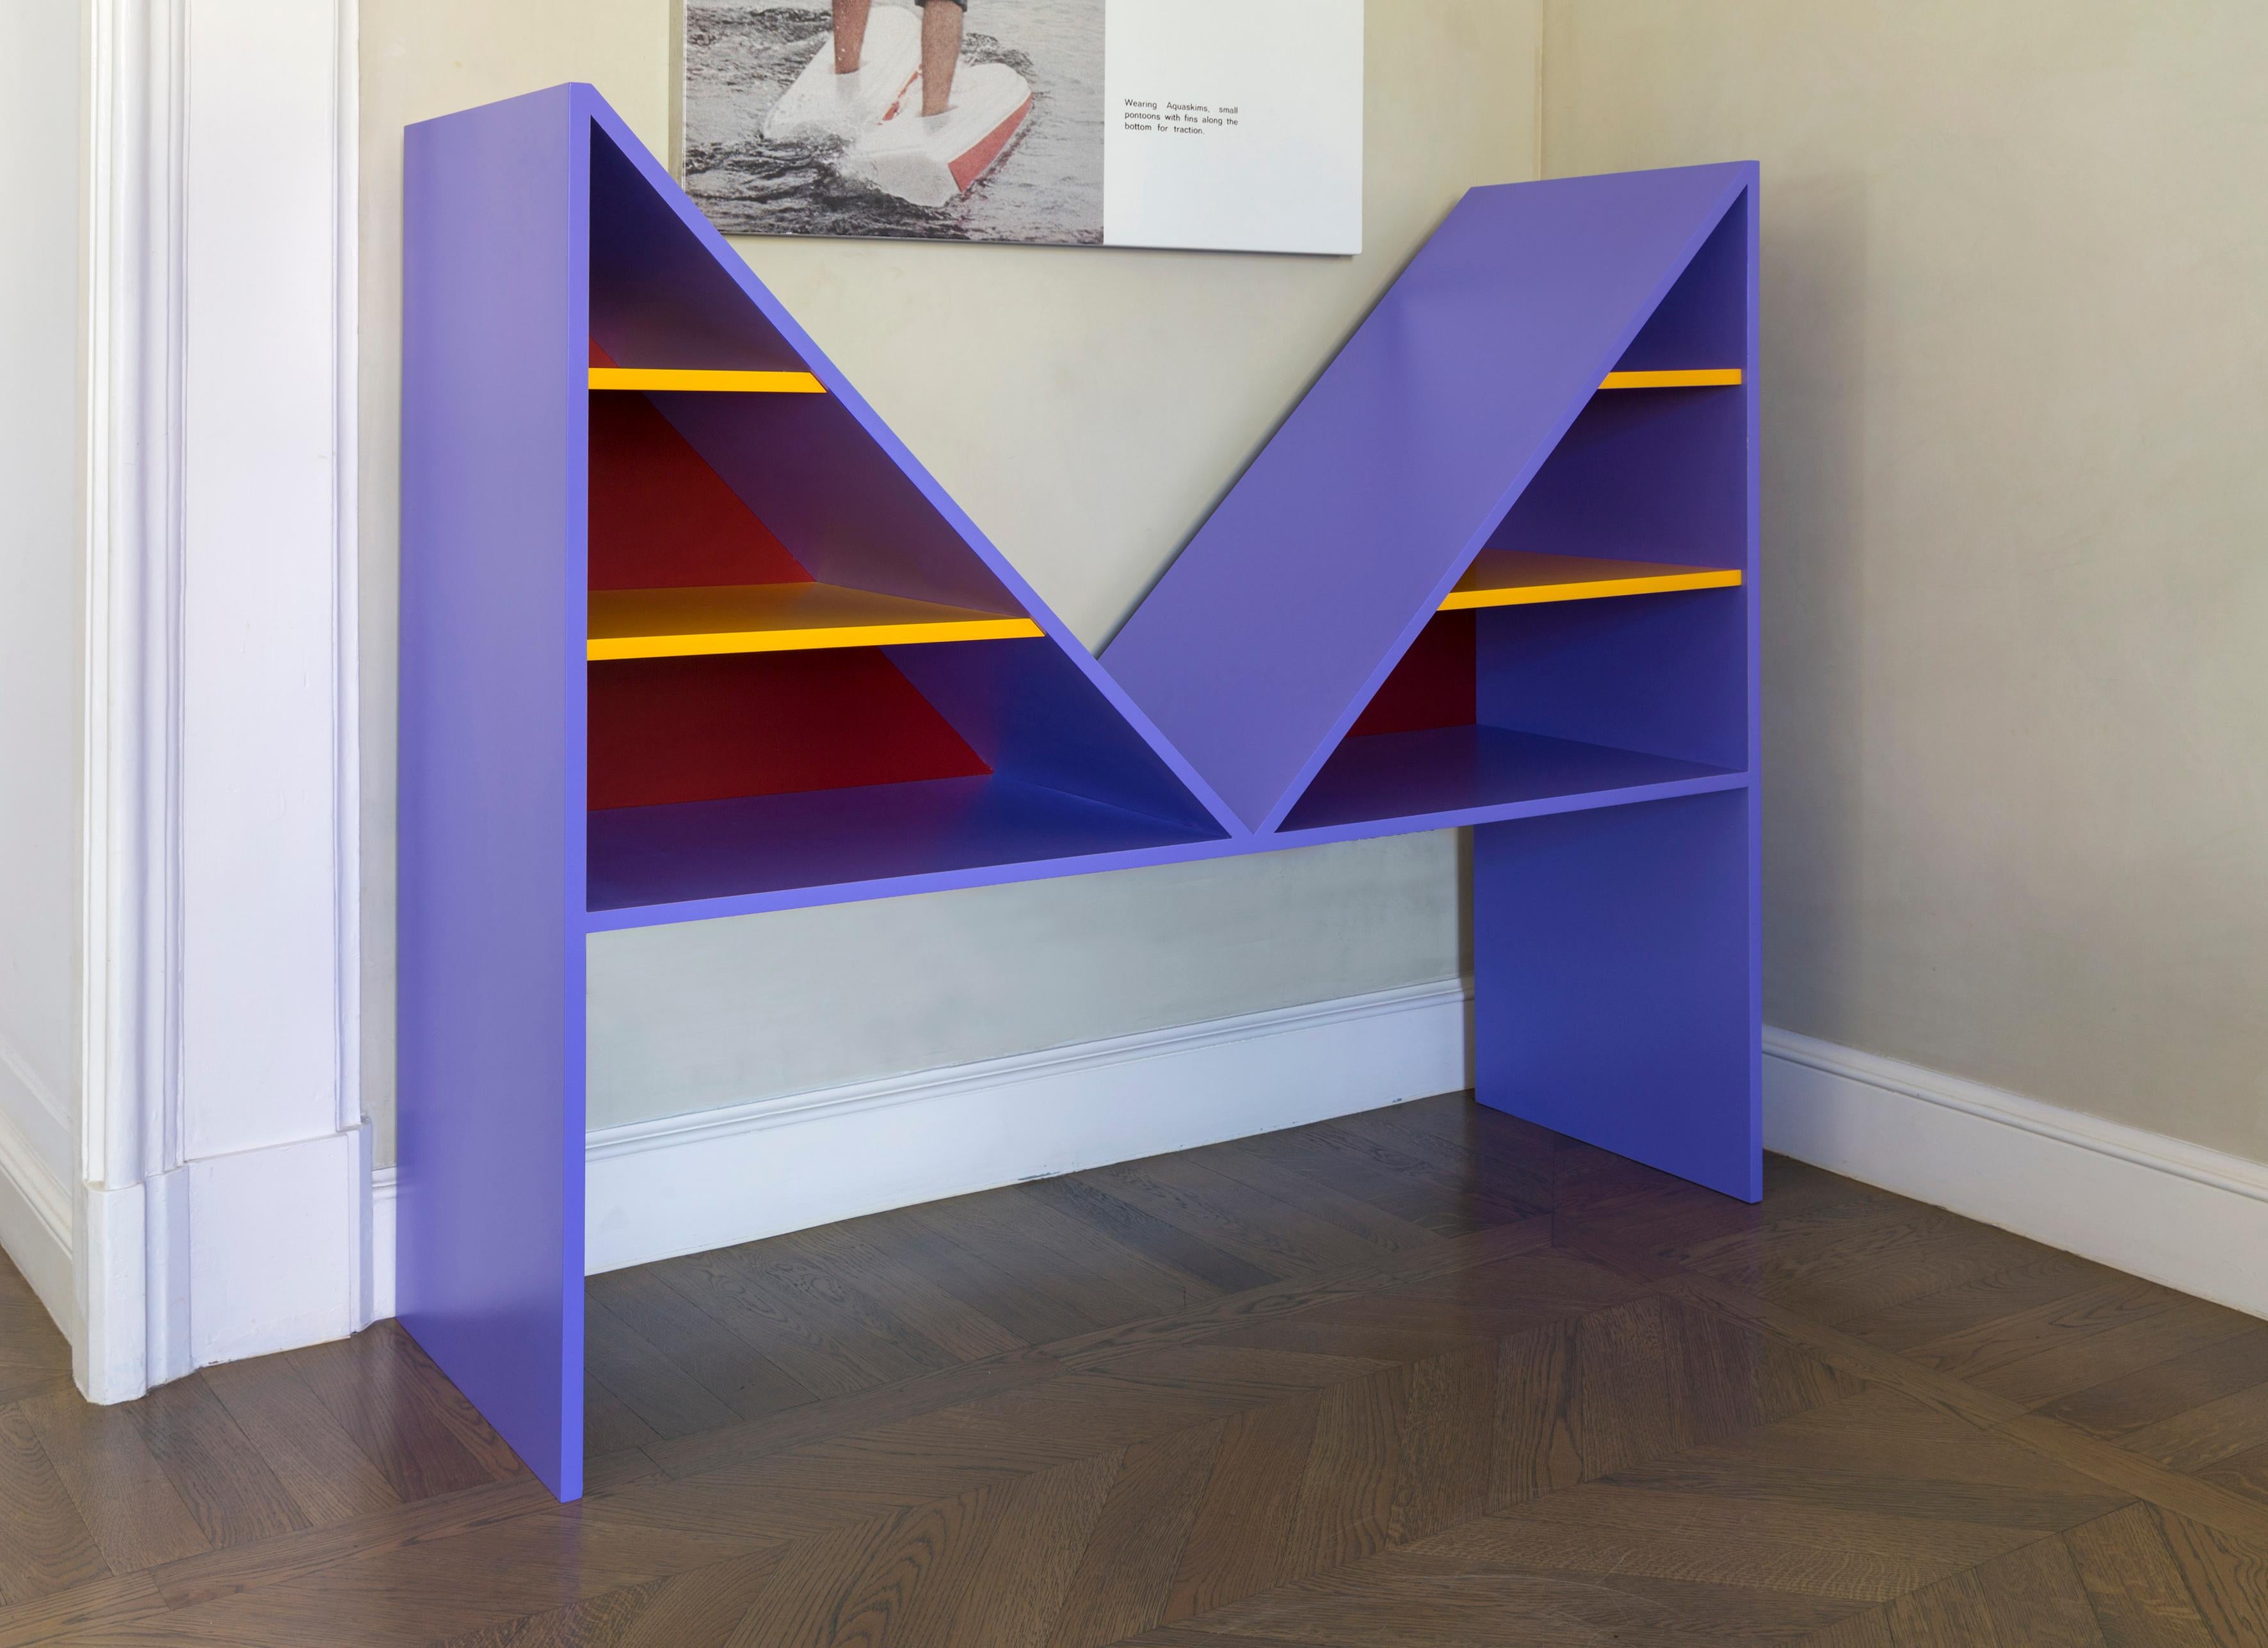 Violet lacquered wood bikini bookcase by Chapel Petrassi
Dimensions: 138 x 45 x 125 cm
Materials: Black lacquered wood 

Chapel Petrassi is a contemporary design and manufacturing company based in Paris and Naples founded by designers